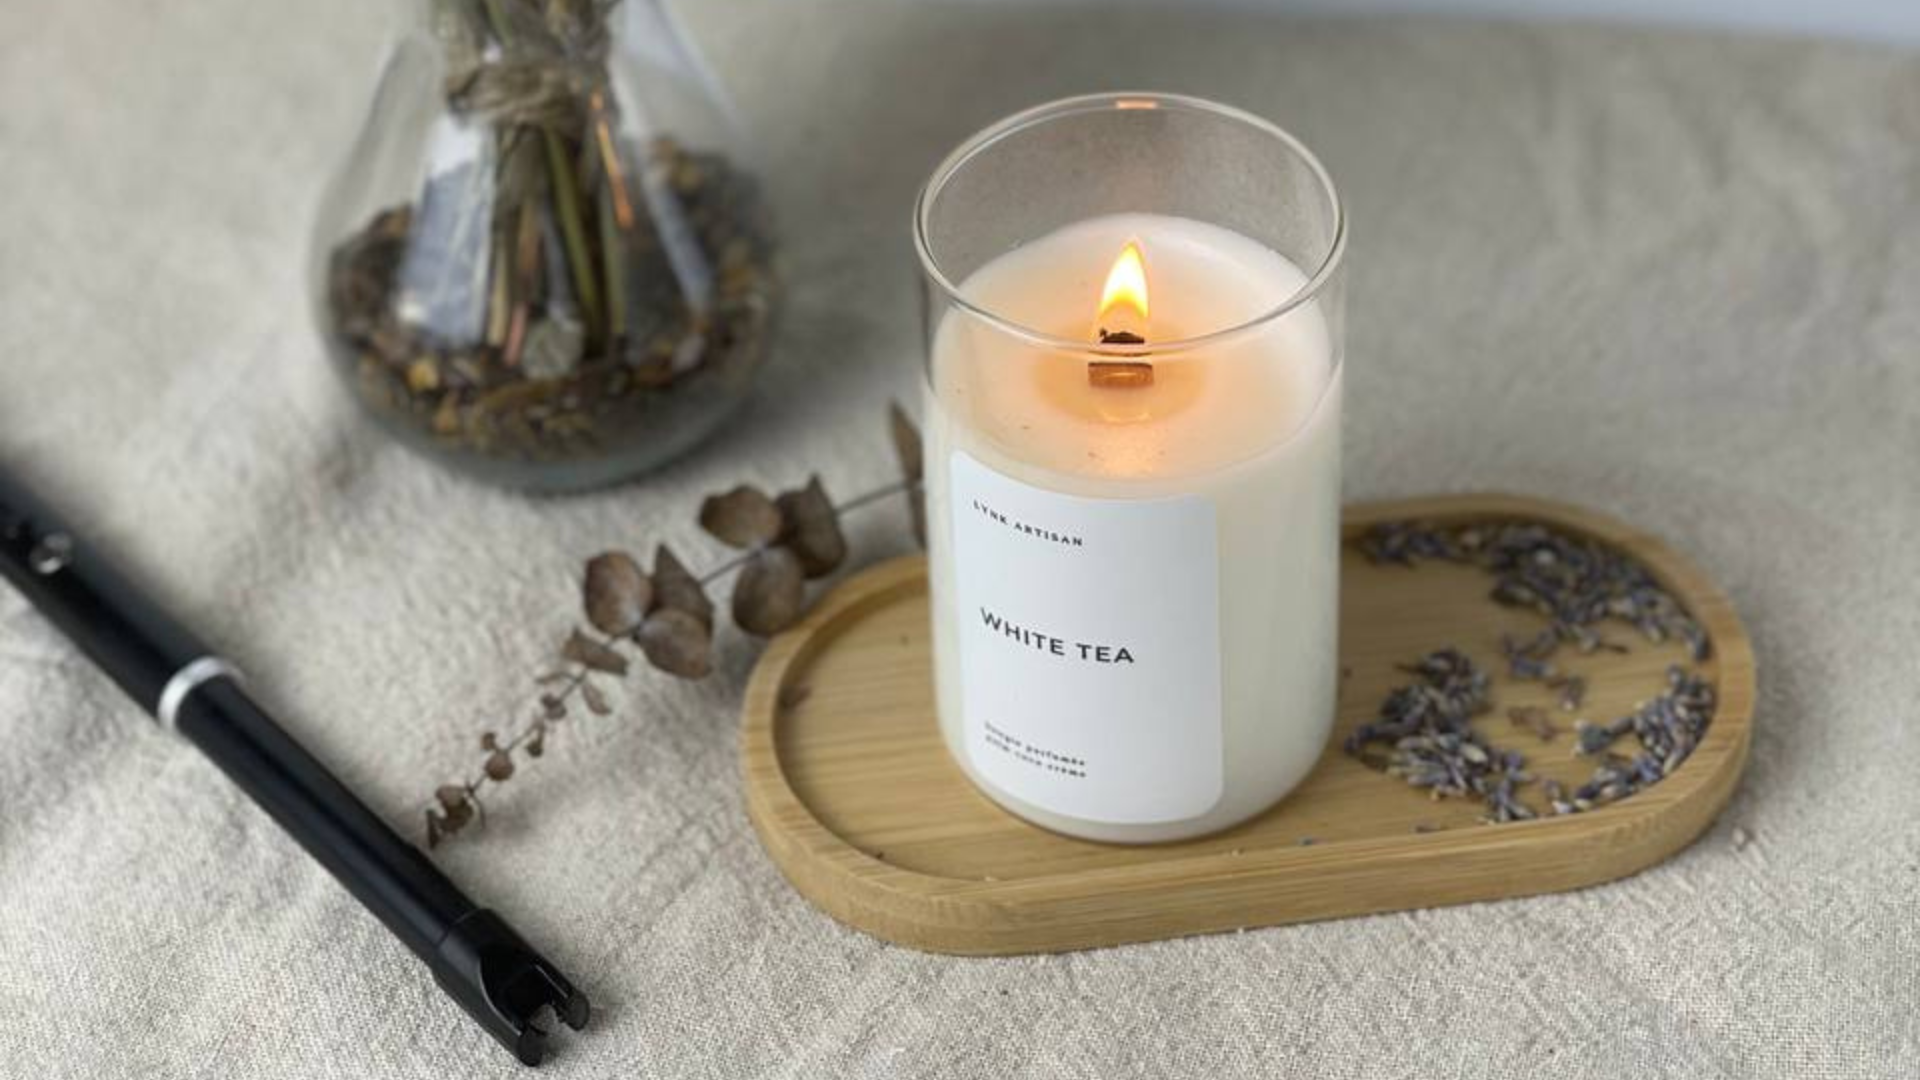 Tea Scented Candles